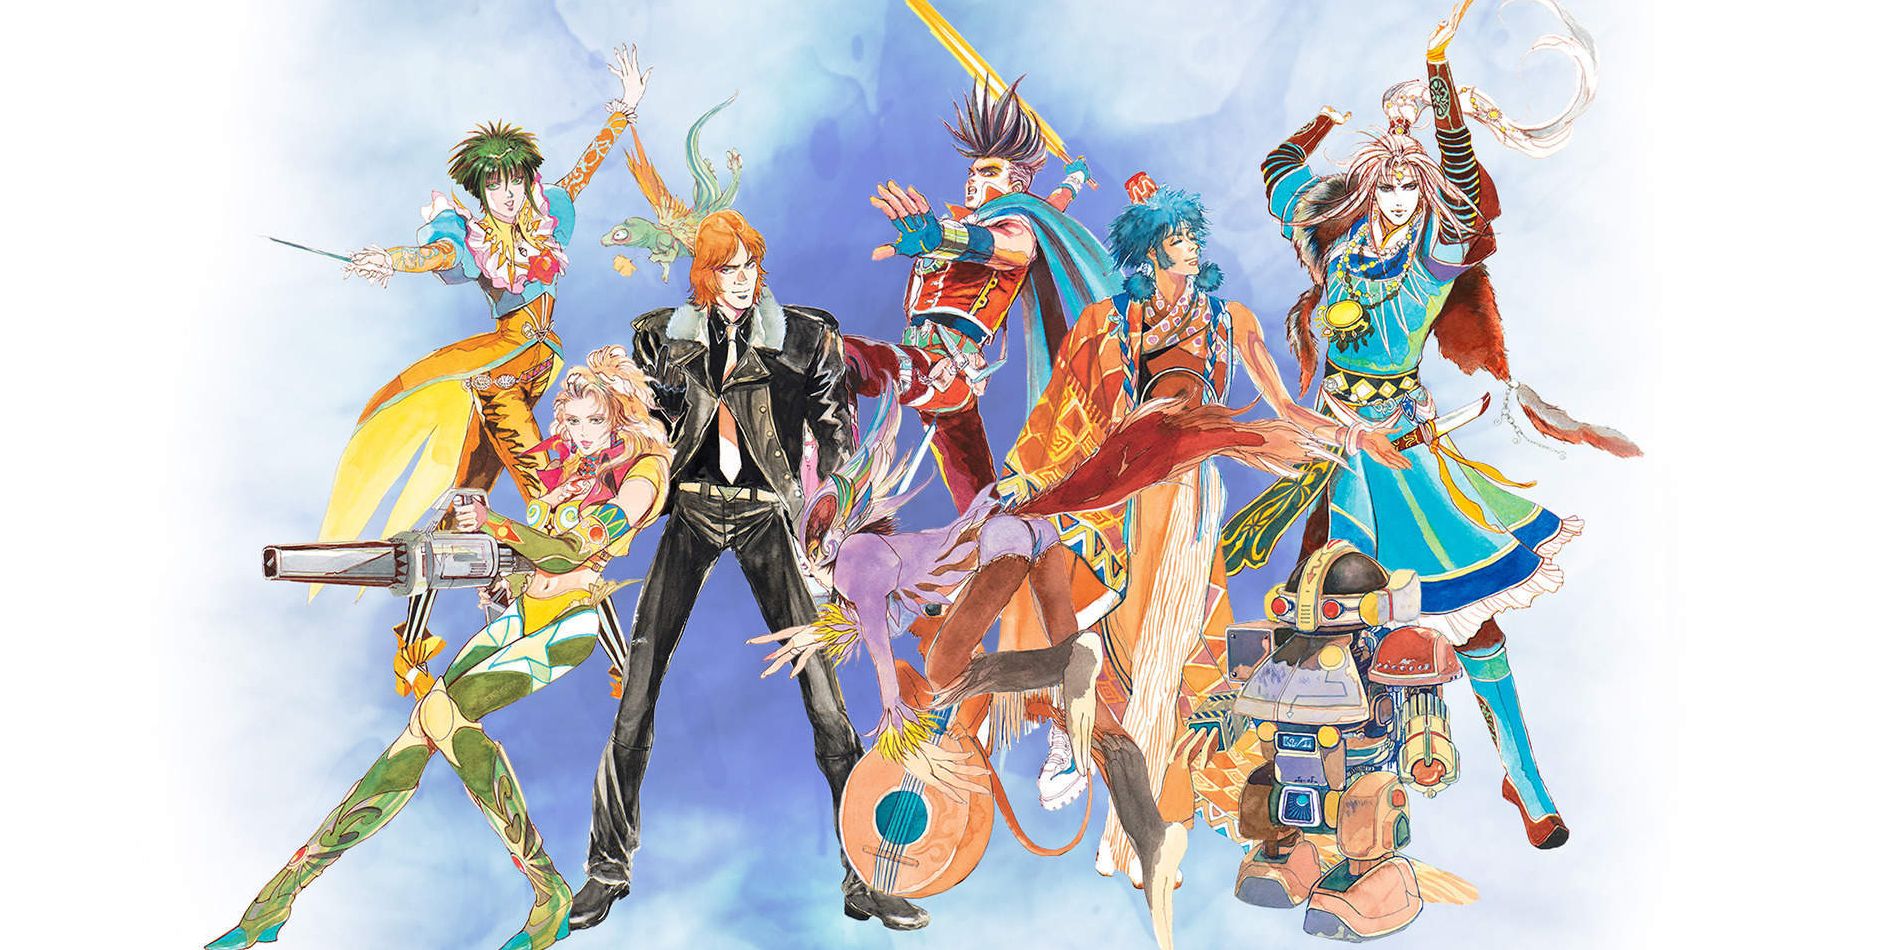 Main heroes of Saga Frontier Remastered including Fuse